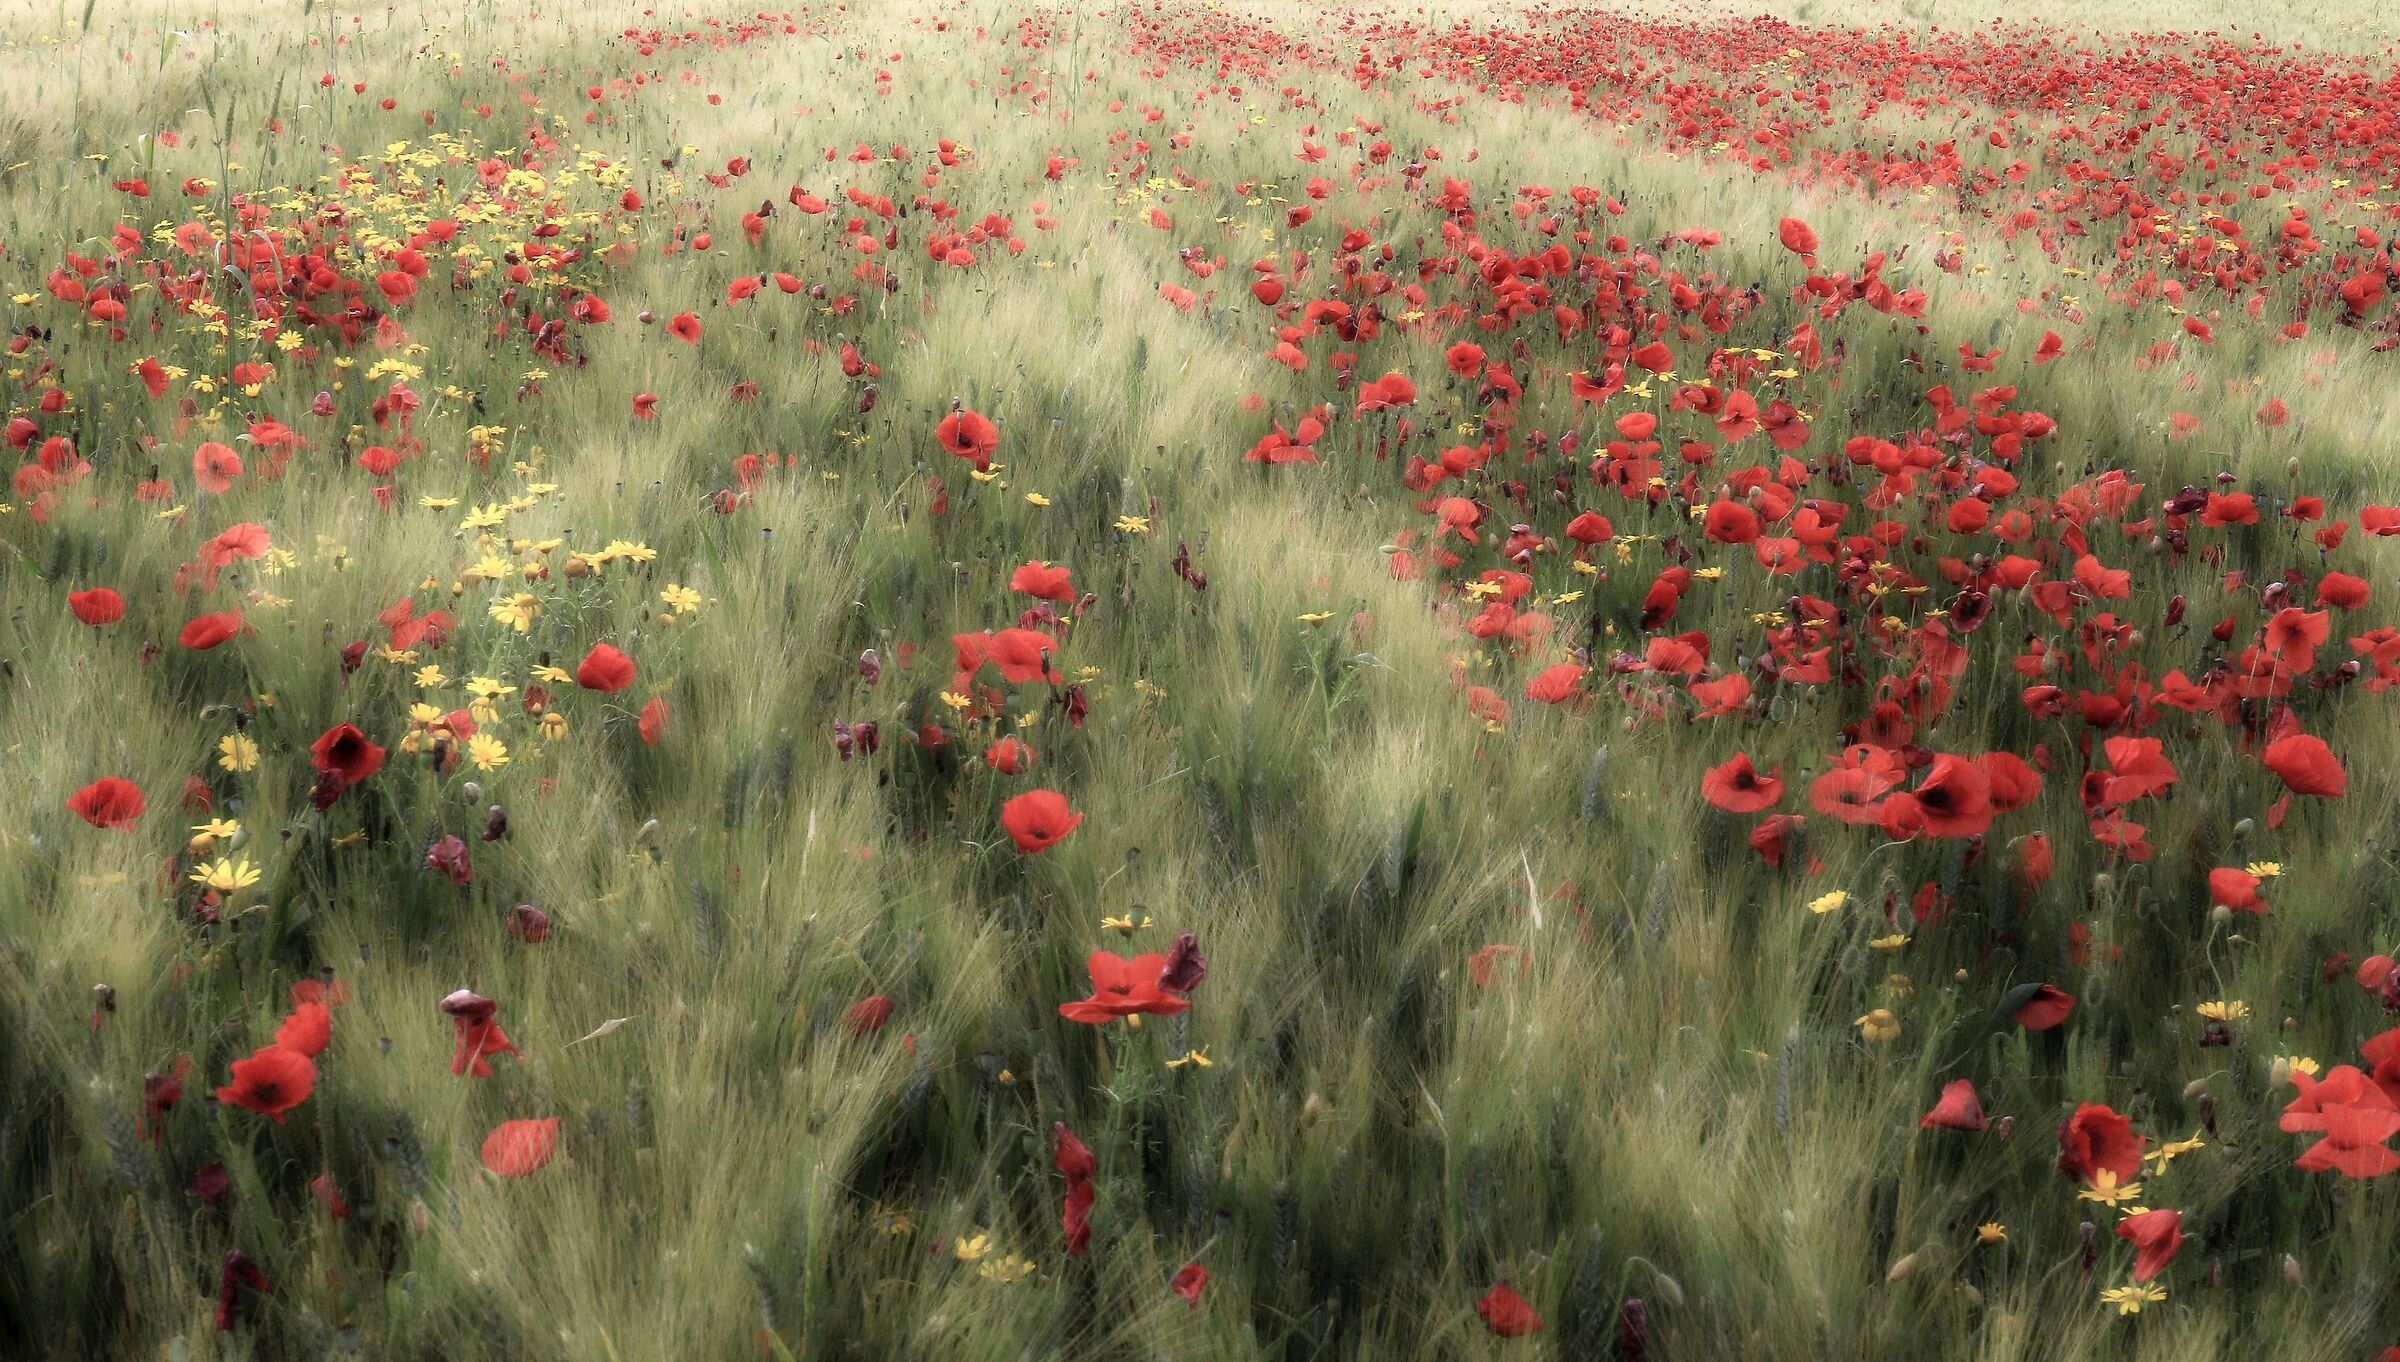 Wheat field and poppies...